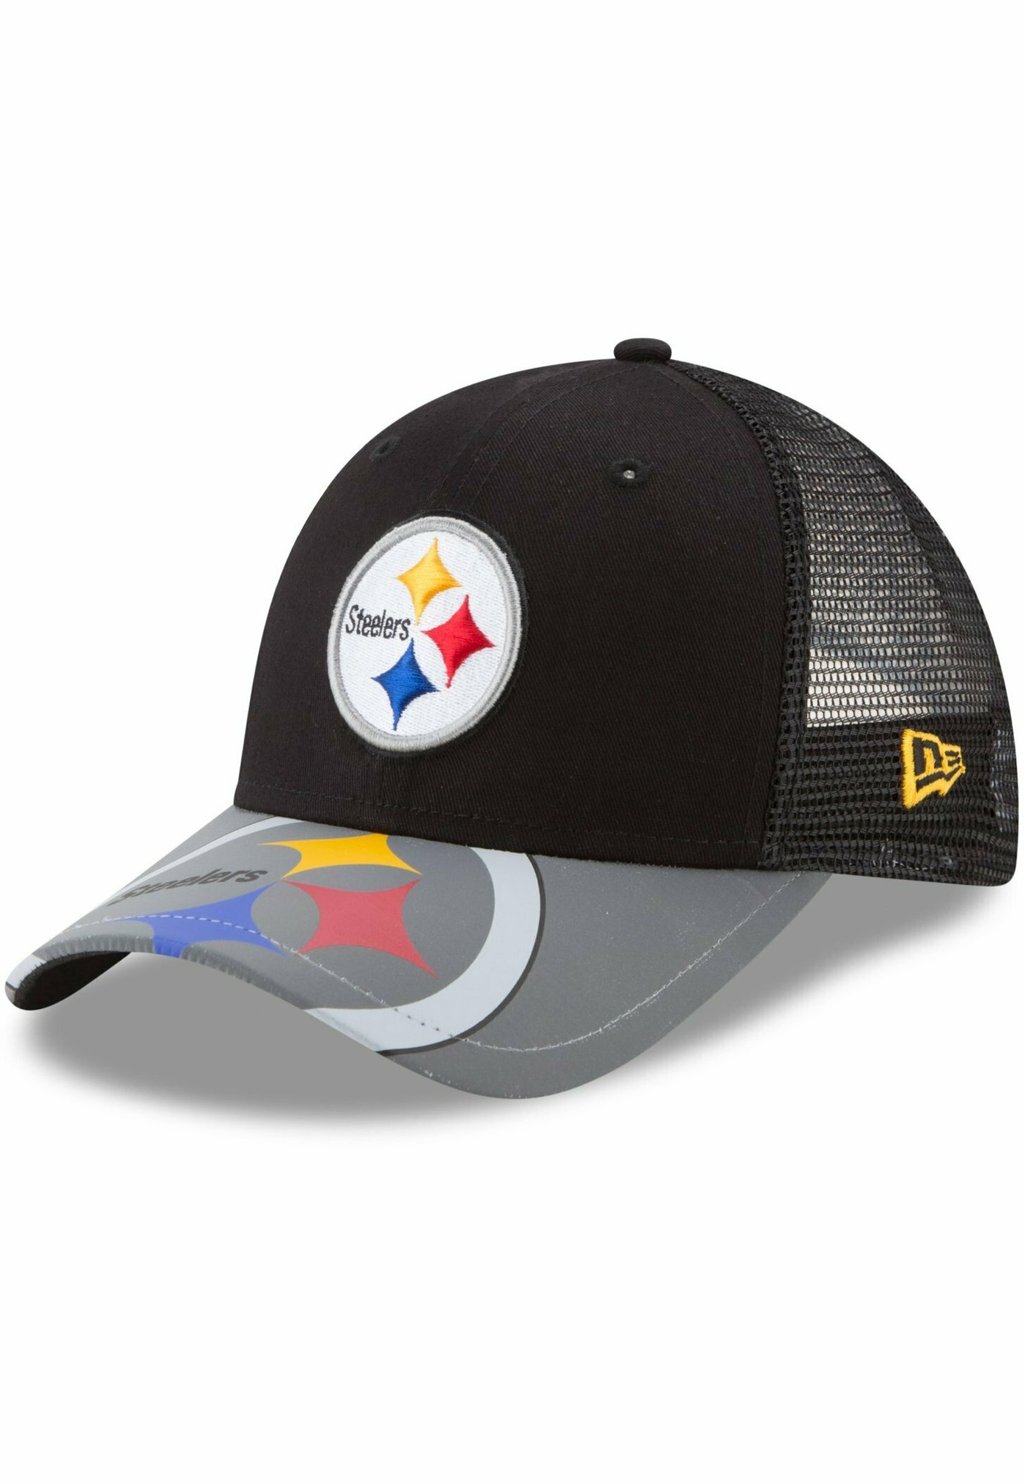 Бейсболка TRUCKER 9FORTY REFLECT VISOR NFL TEAMS New Era, цвет pittsburgh steelers 2021 new steelers men s fans rugby jerseys sports fans bush american wear devin football pittsburgh jersey stitched t shirts